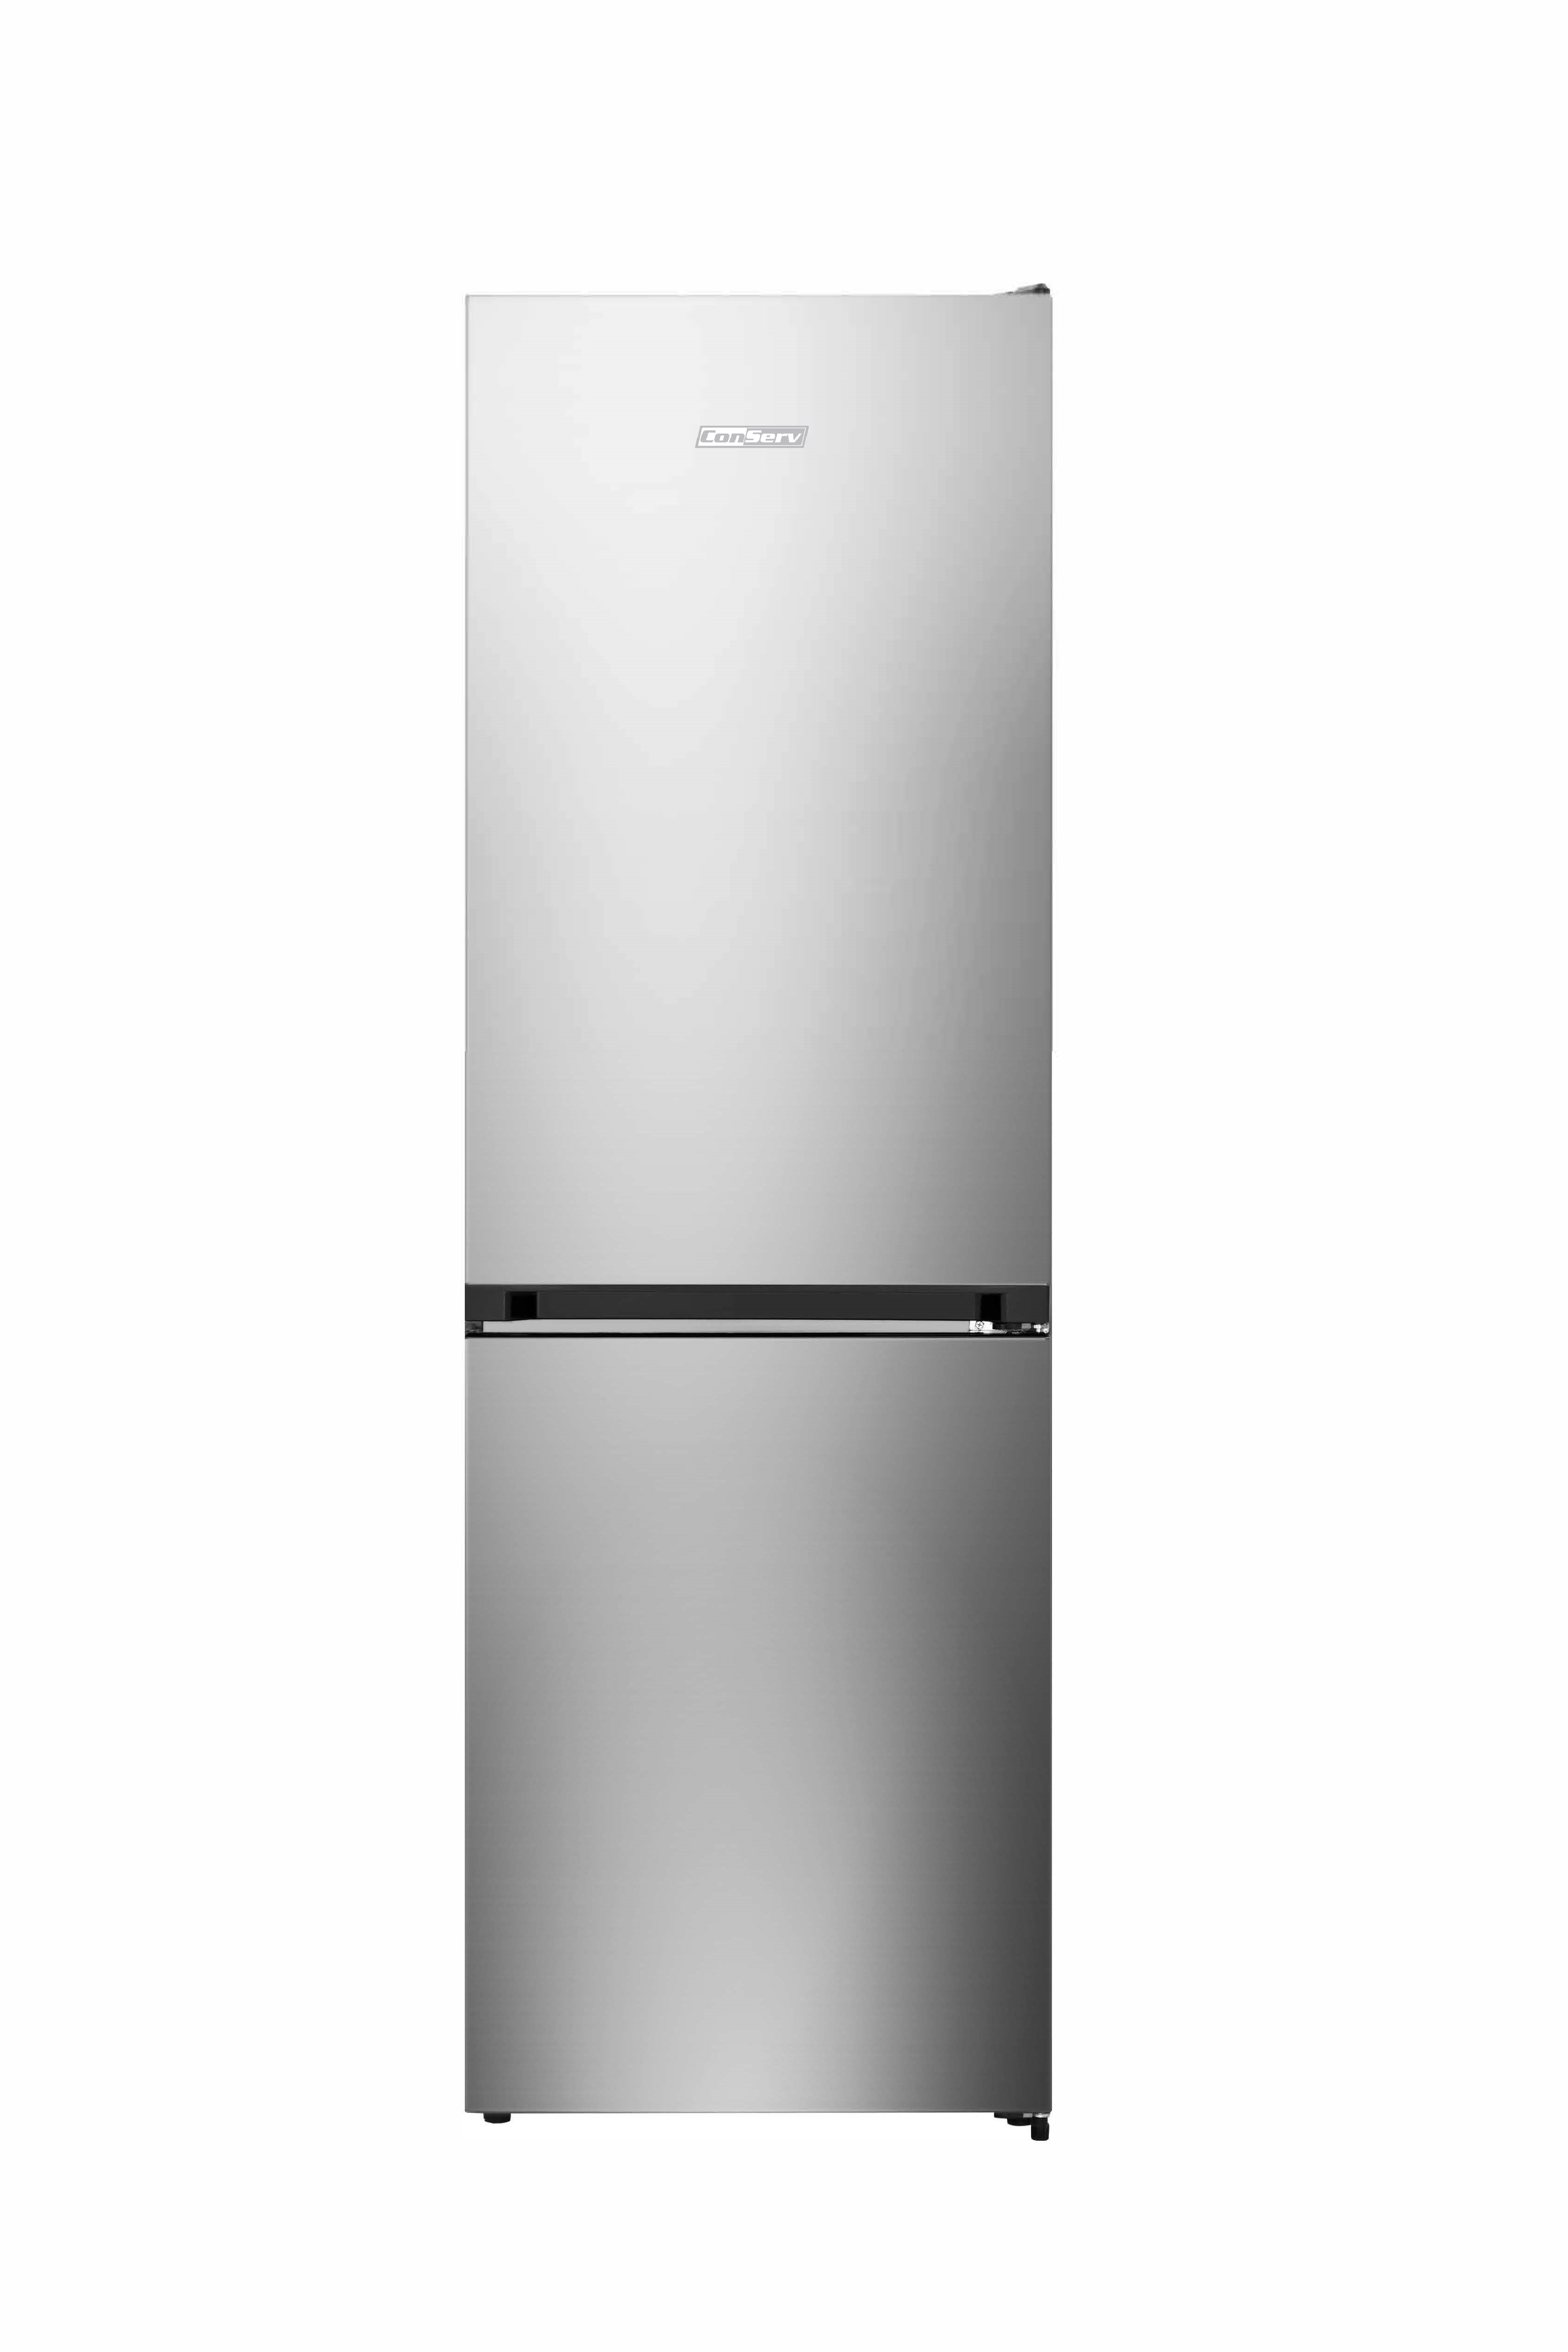 Conserv 11Cu. Ft. Tall Bottom Mount Frost-Free Apartment Refrigerator in Stainless Steel